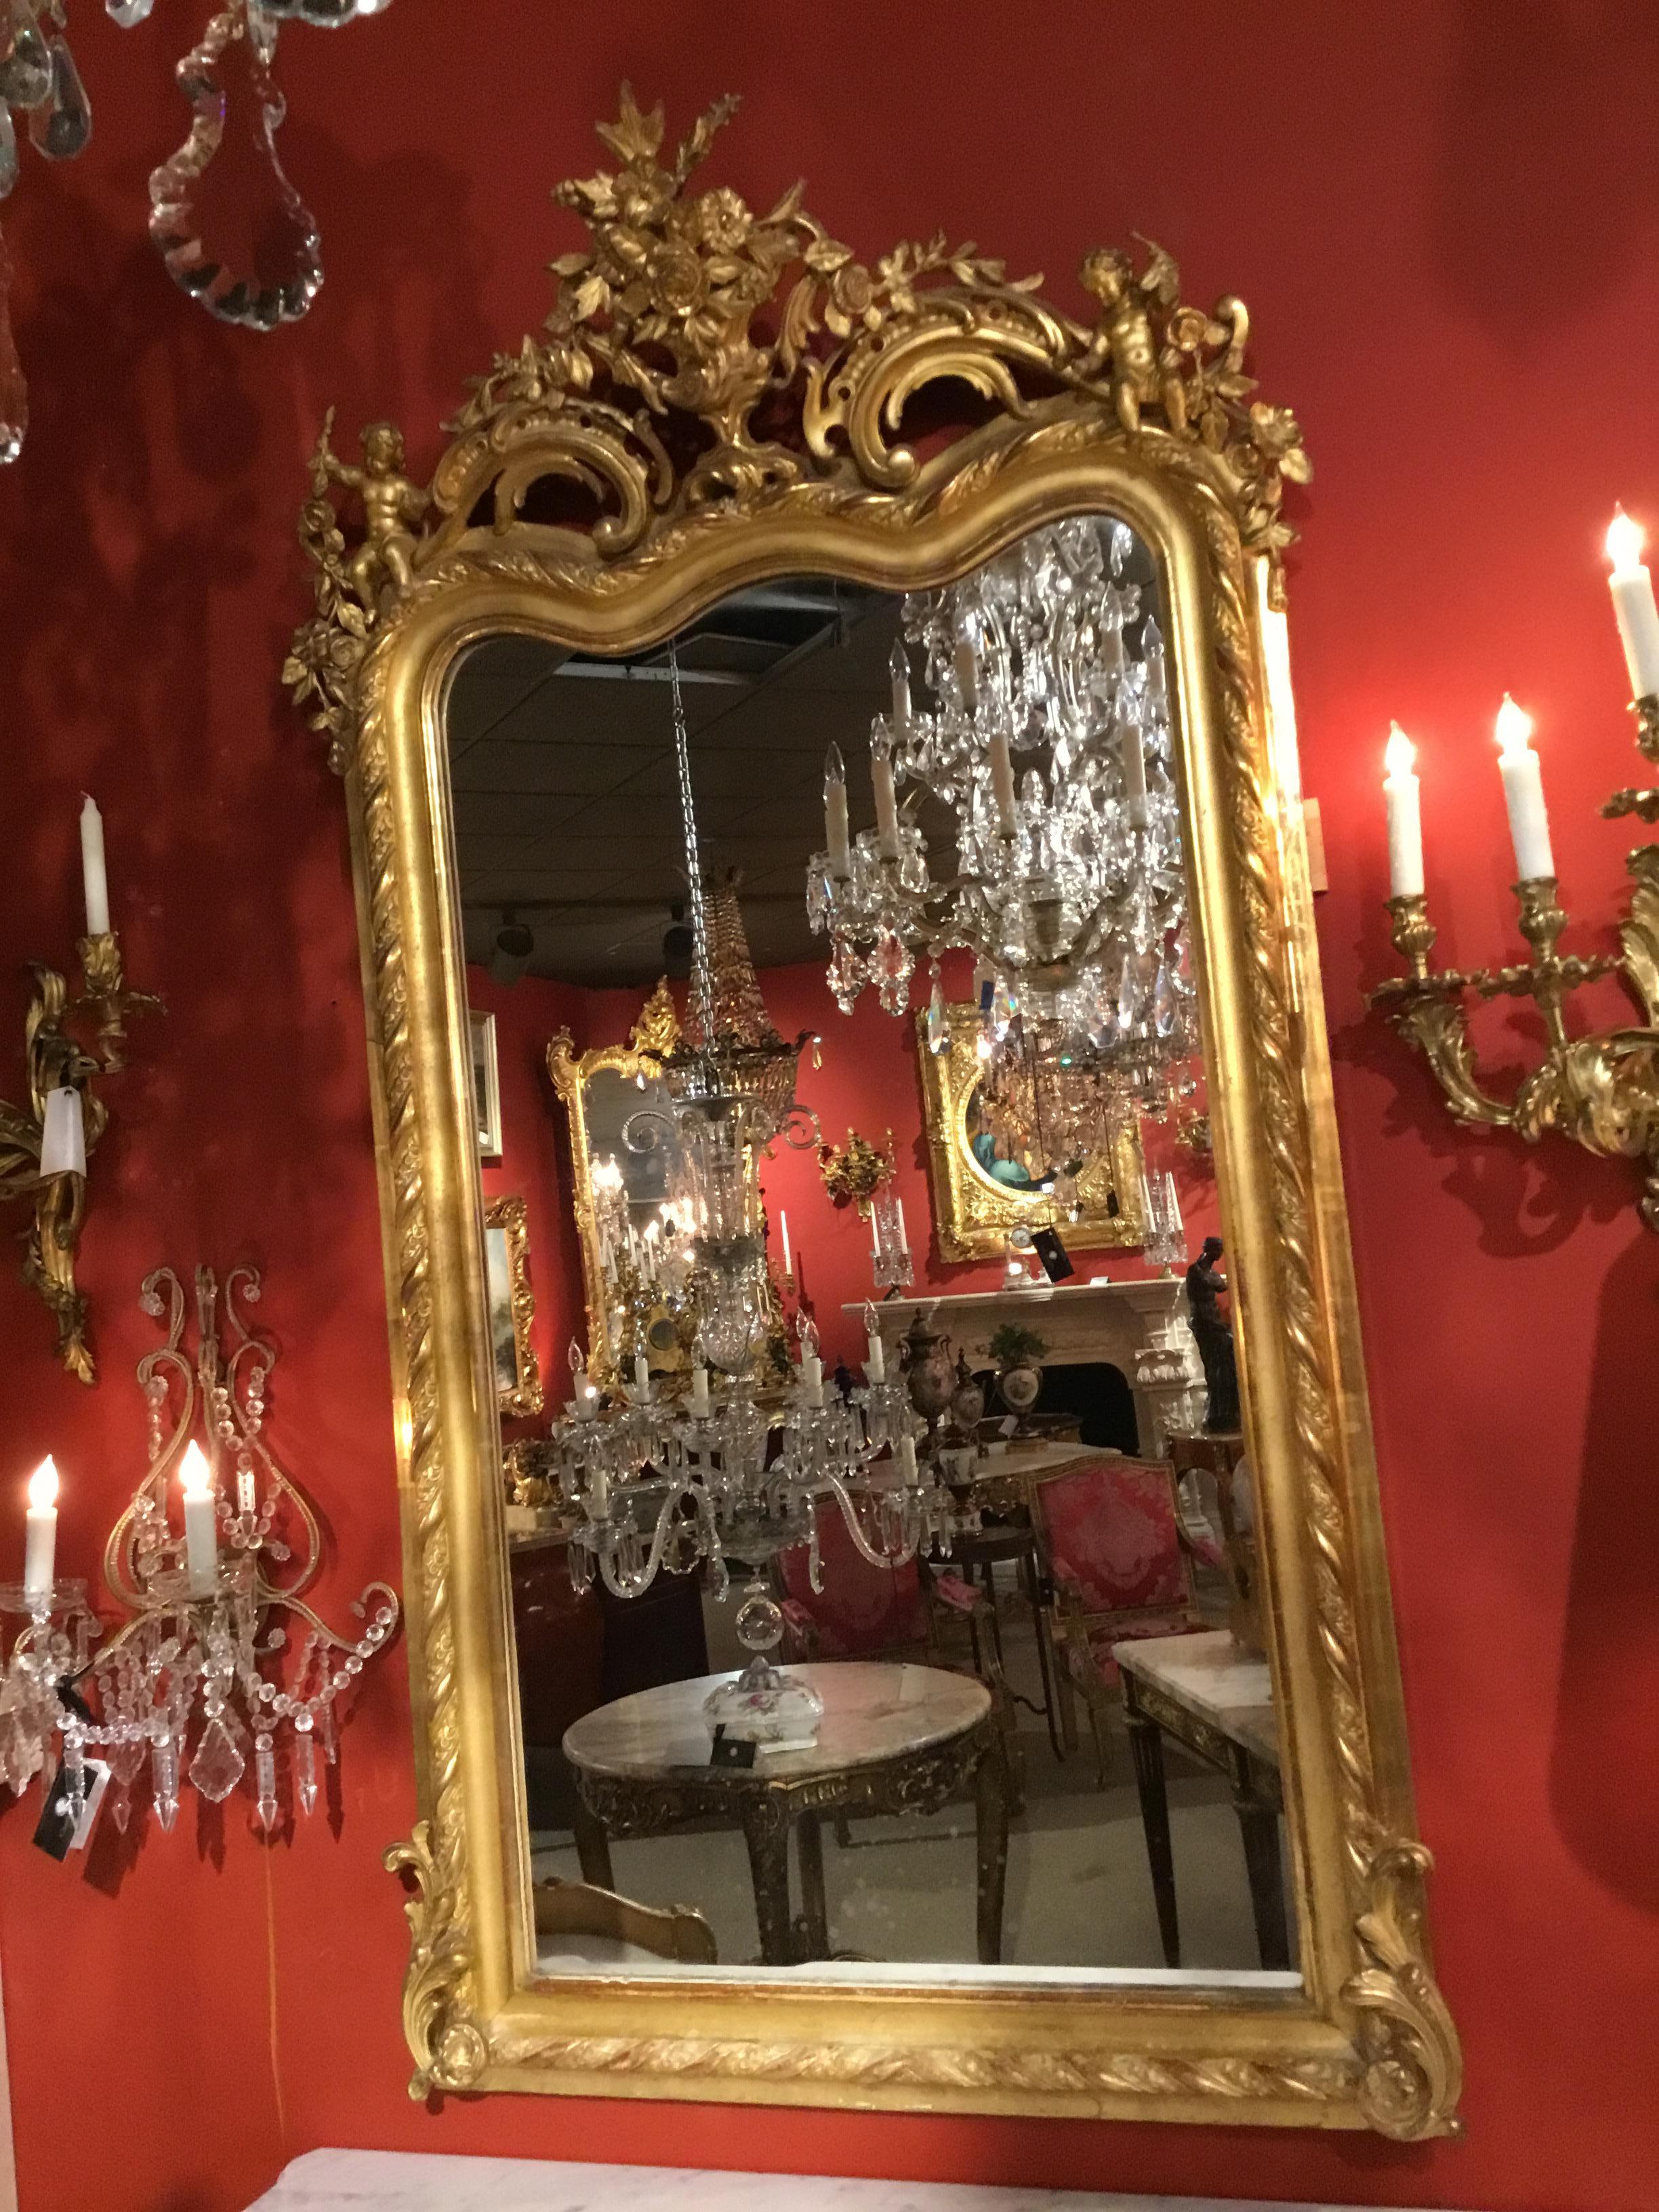 Giltwood French mirrors with a carved urn filled with a floral bouquet
Gilt putti adorn each of the upper corners. A roped design is draped
Down the sides and the bottom of these mirrors. It is rare to find two
Matching pieces like this.